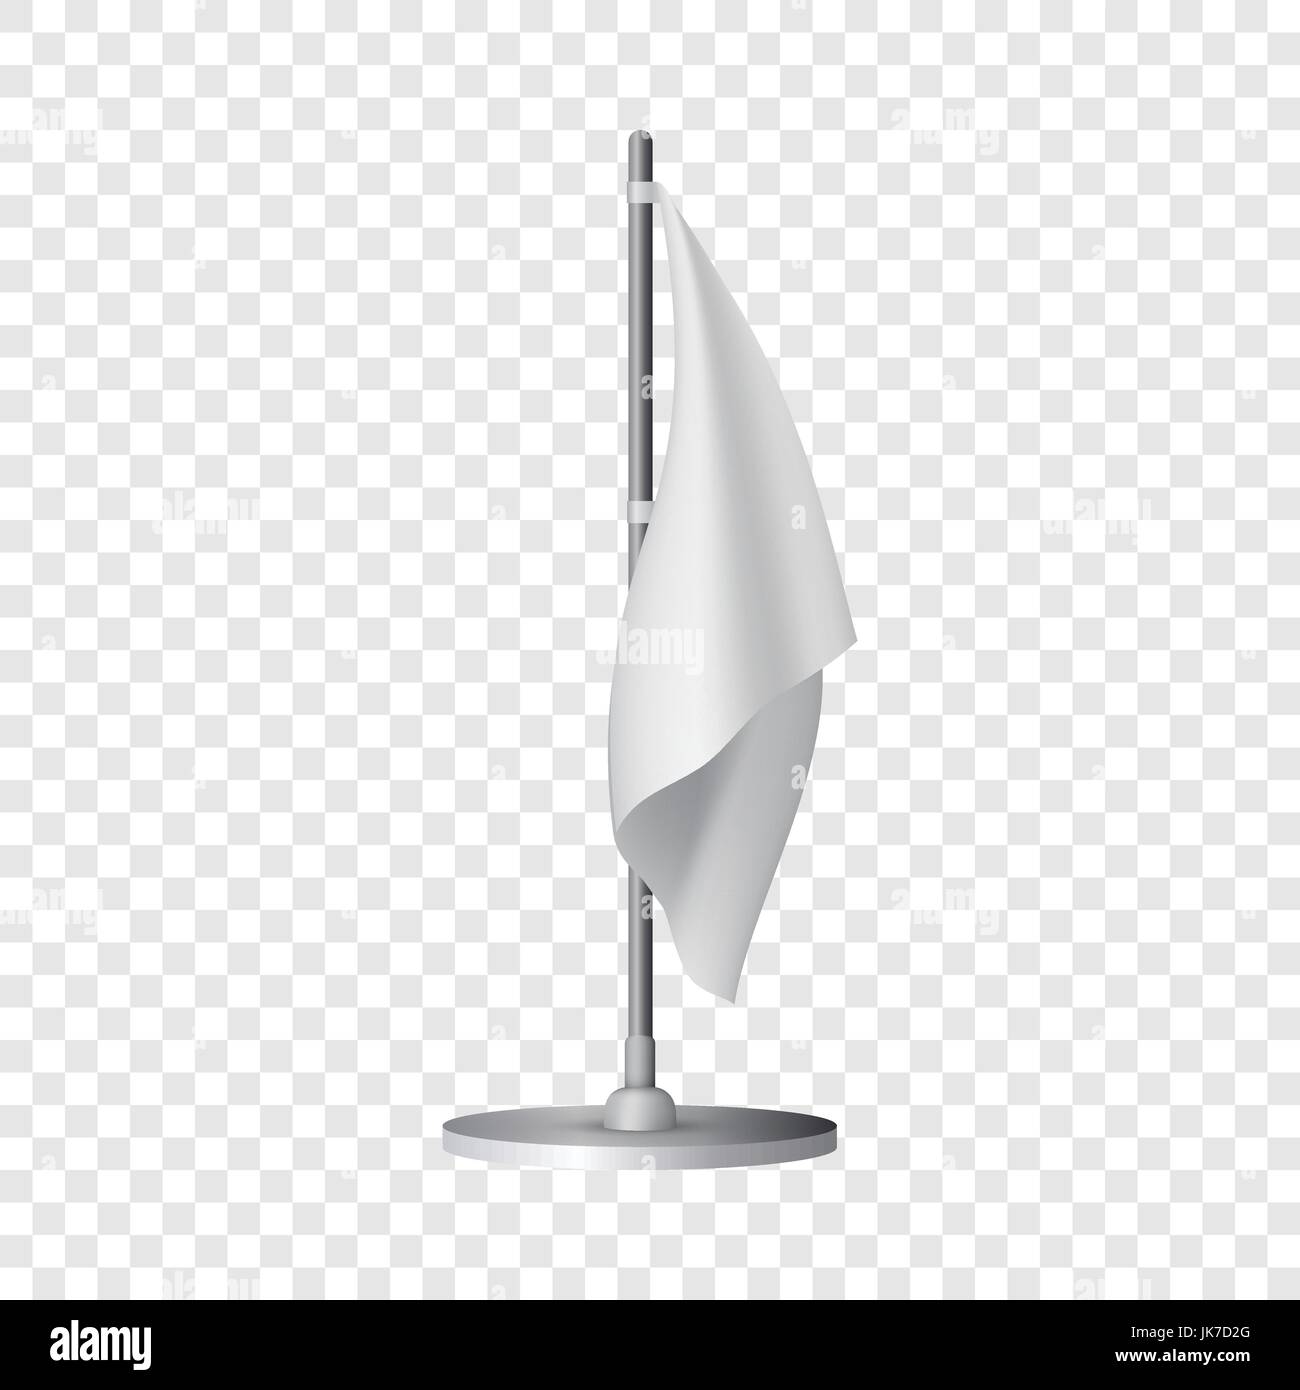 Download White Table Flag Mockup Realistic Style Stock Vector Image Art Alamy